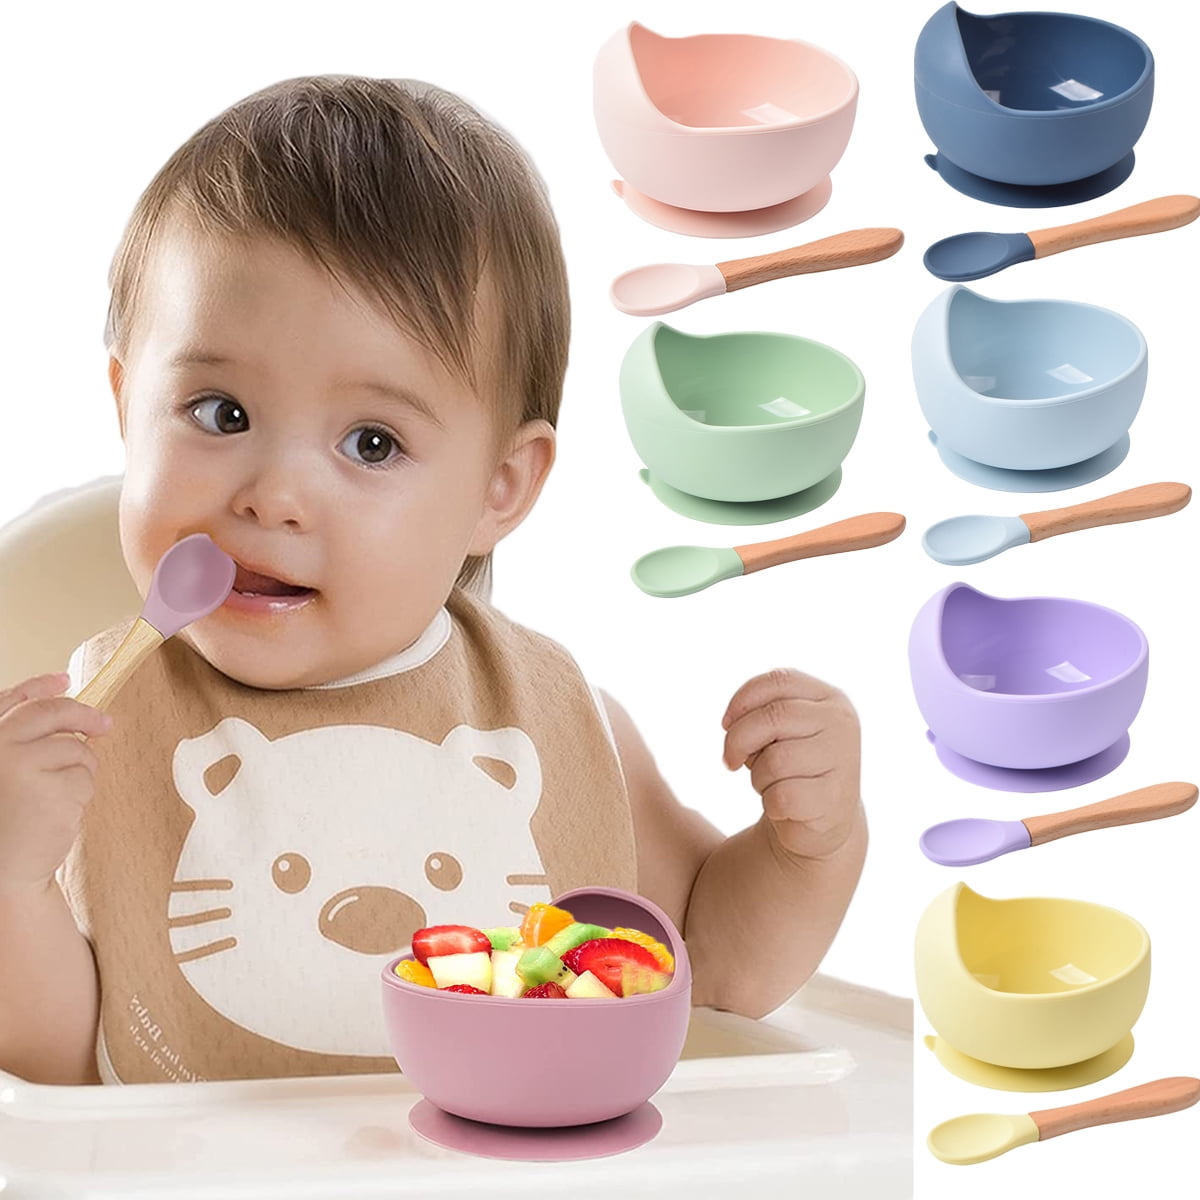 Silicone Baby Bowls with Spoon, 2pcs Baby Feeding Set Suction Bowls for Kids Toddlers -BPA Free-Baby Dishes Utensils, Size: 10, Purple